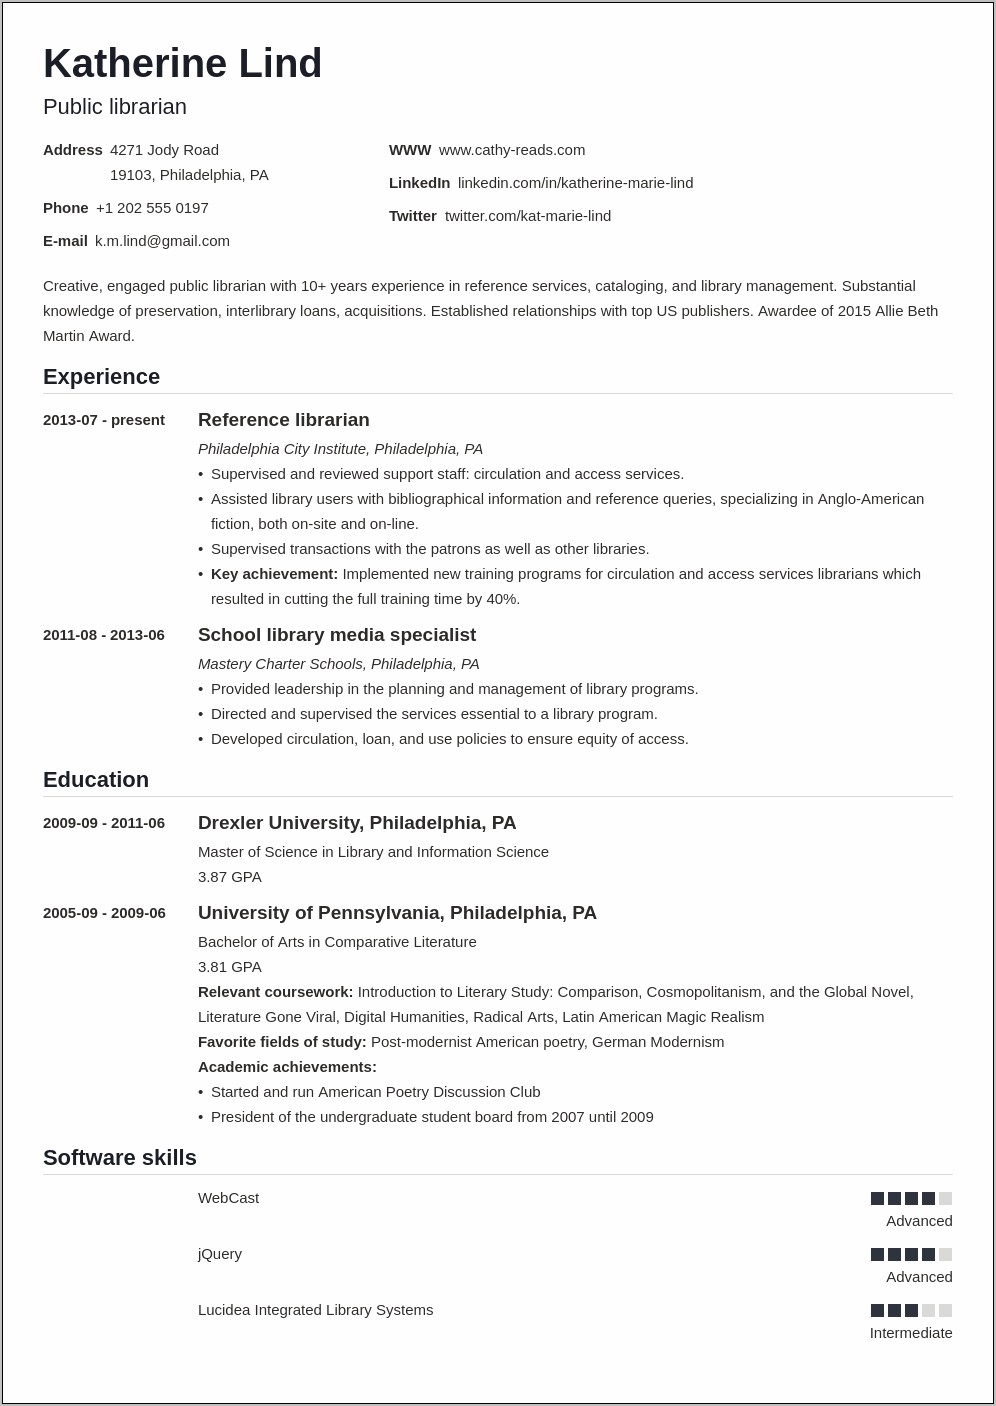 Resume For Public Librarian Job